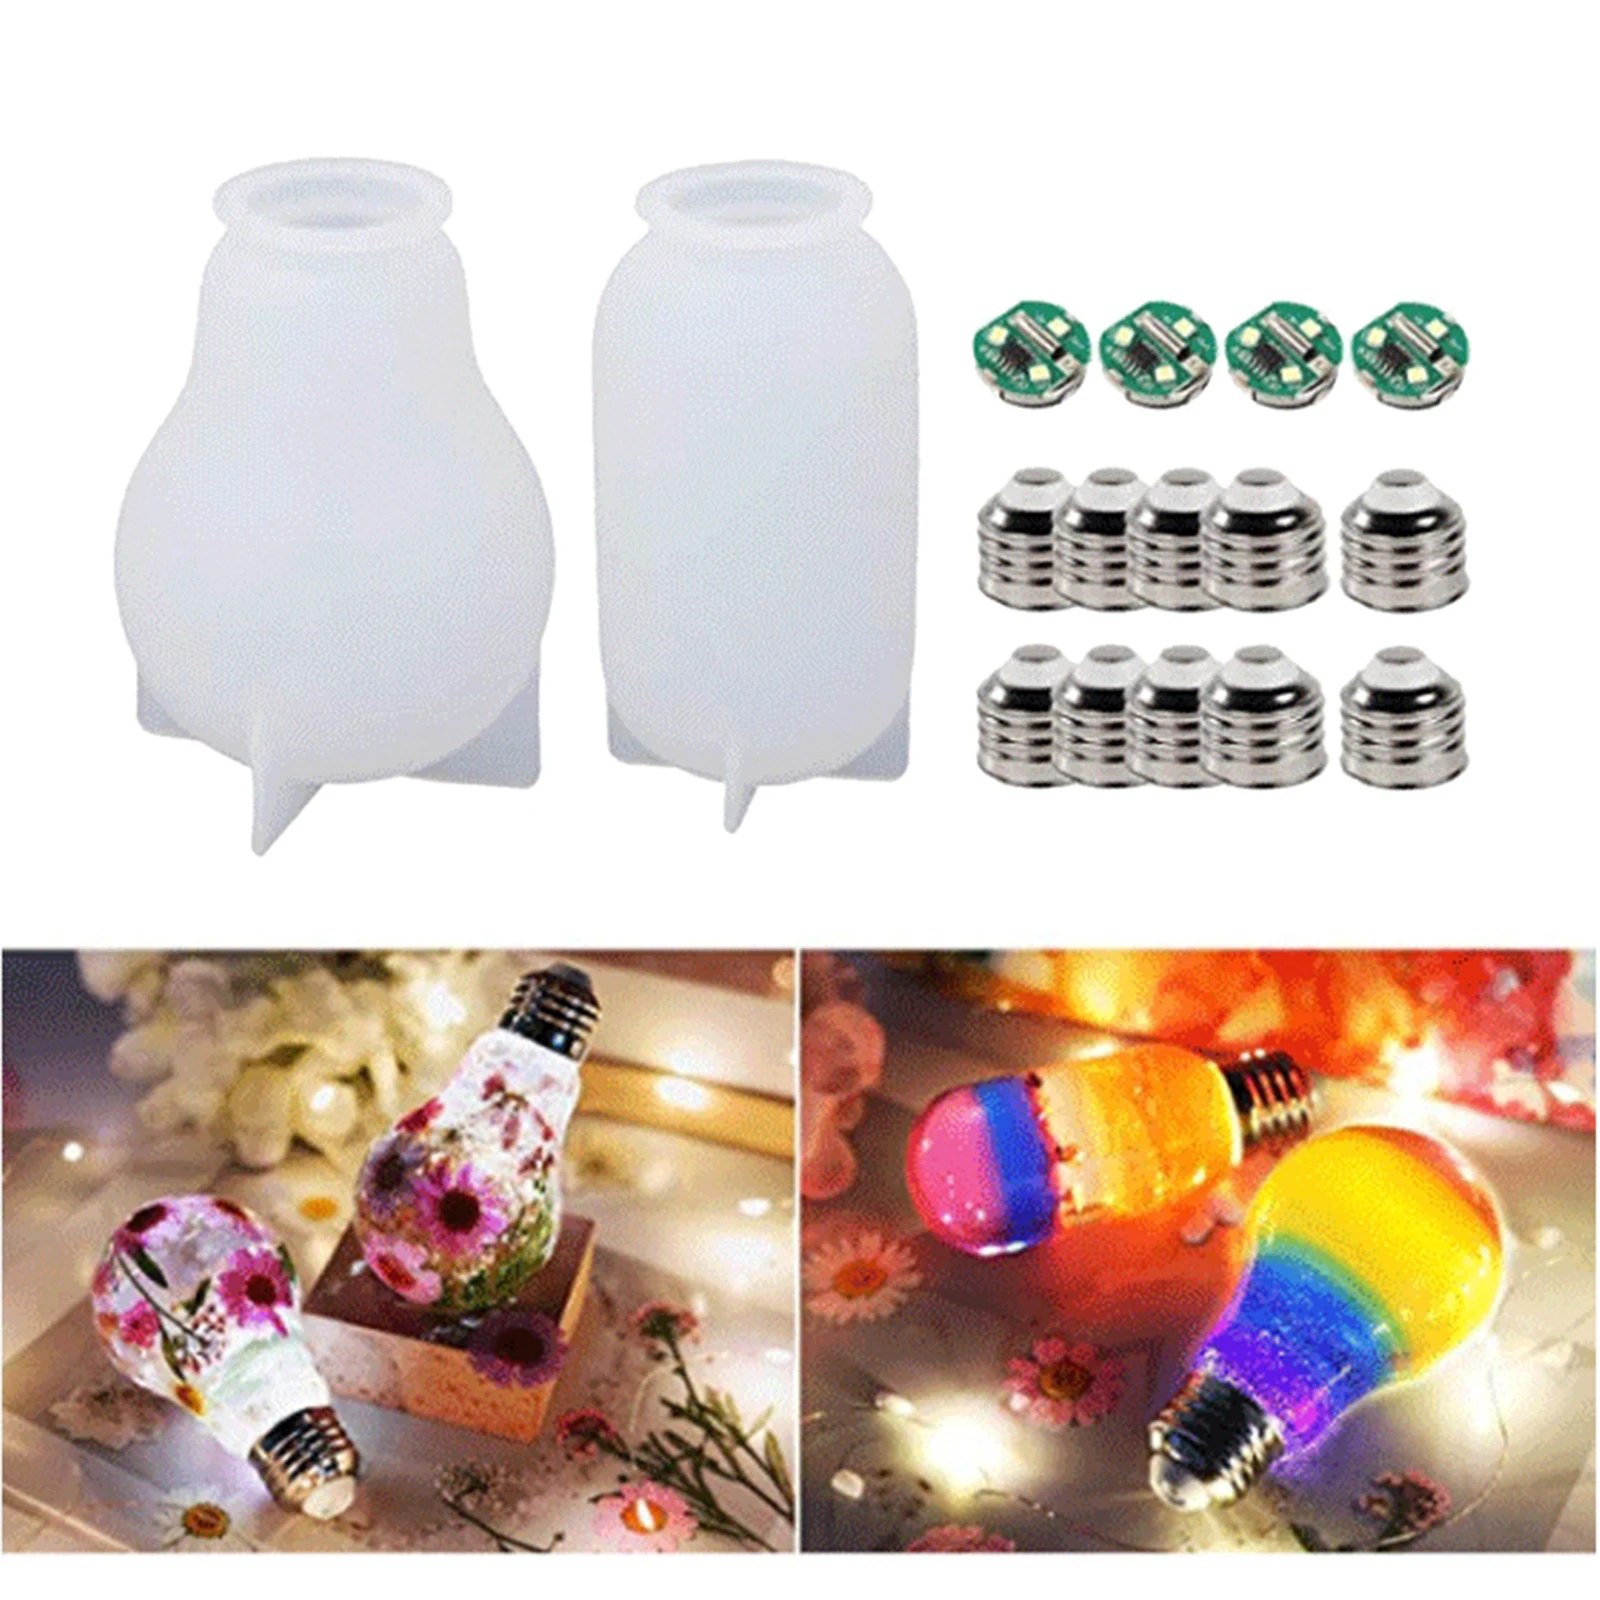 Resin Light Bulb Mold Set Chip Base Caps Silicone LED Bulb DIY Epoxy Molds, Creates a Very Pleasant Ambiance Under Light